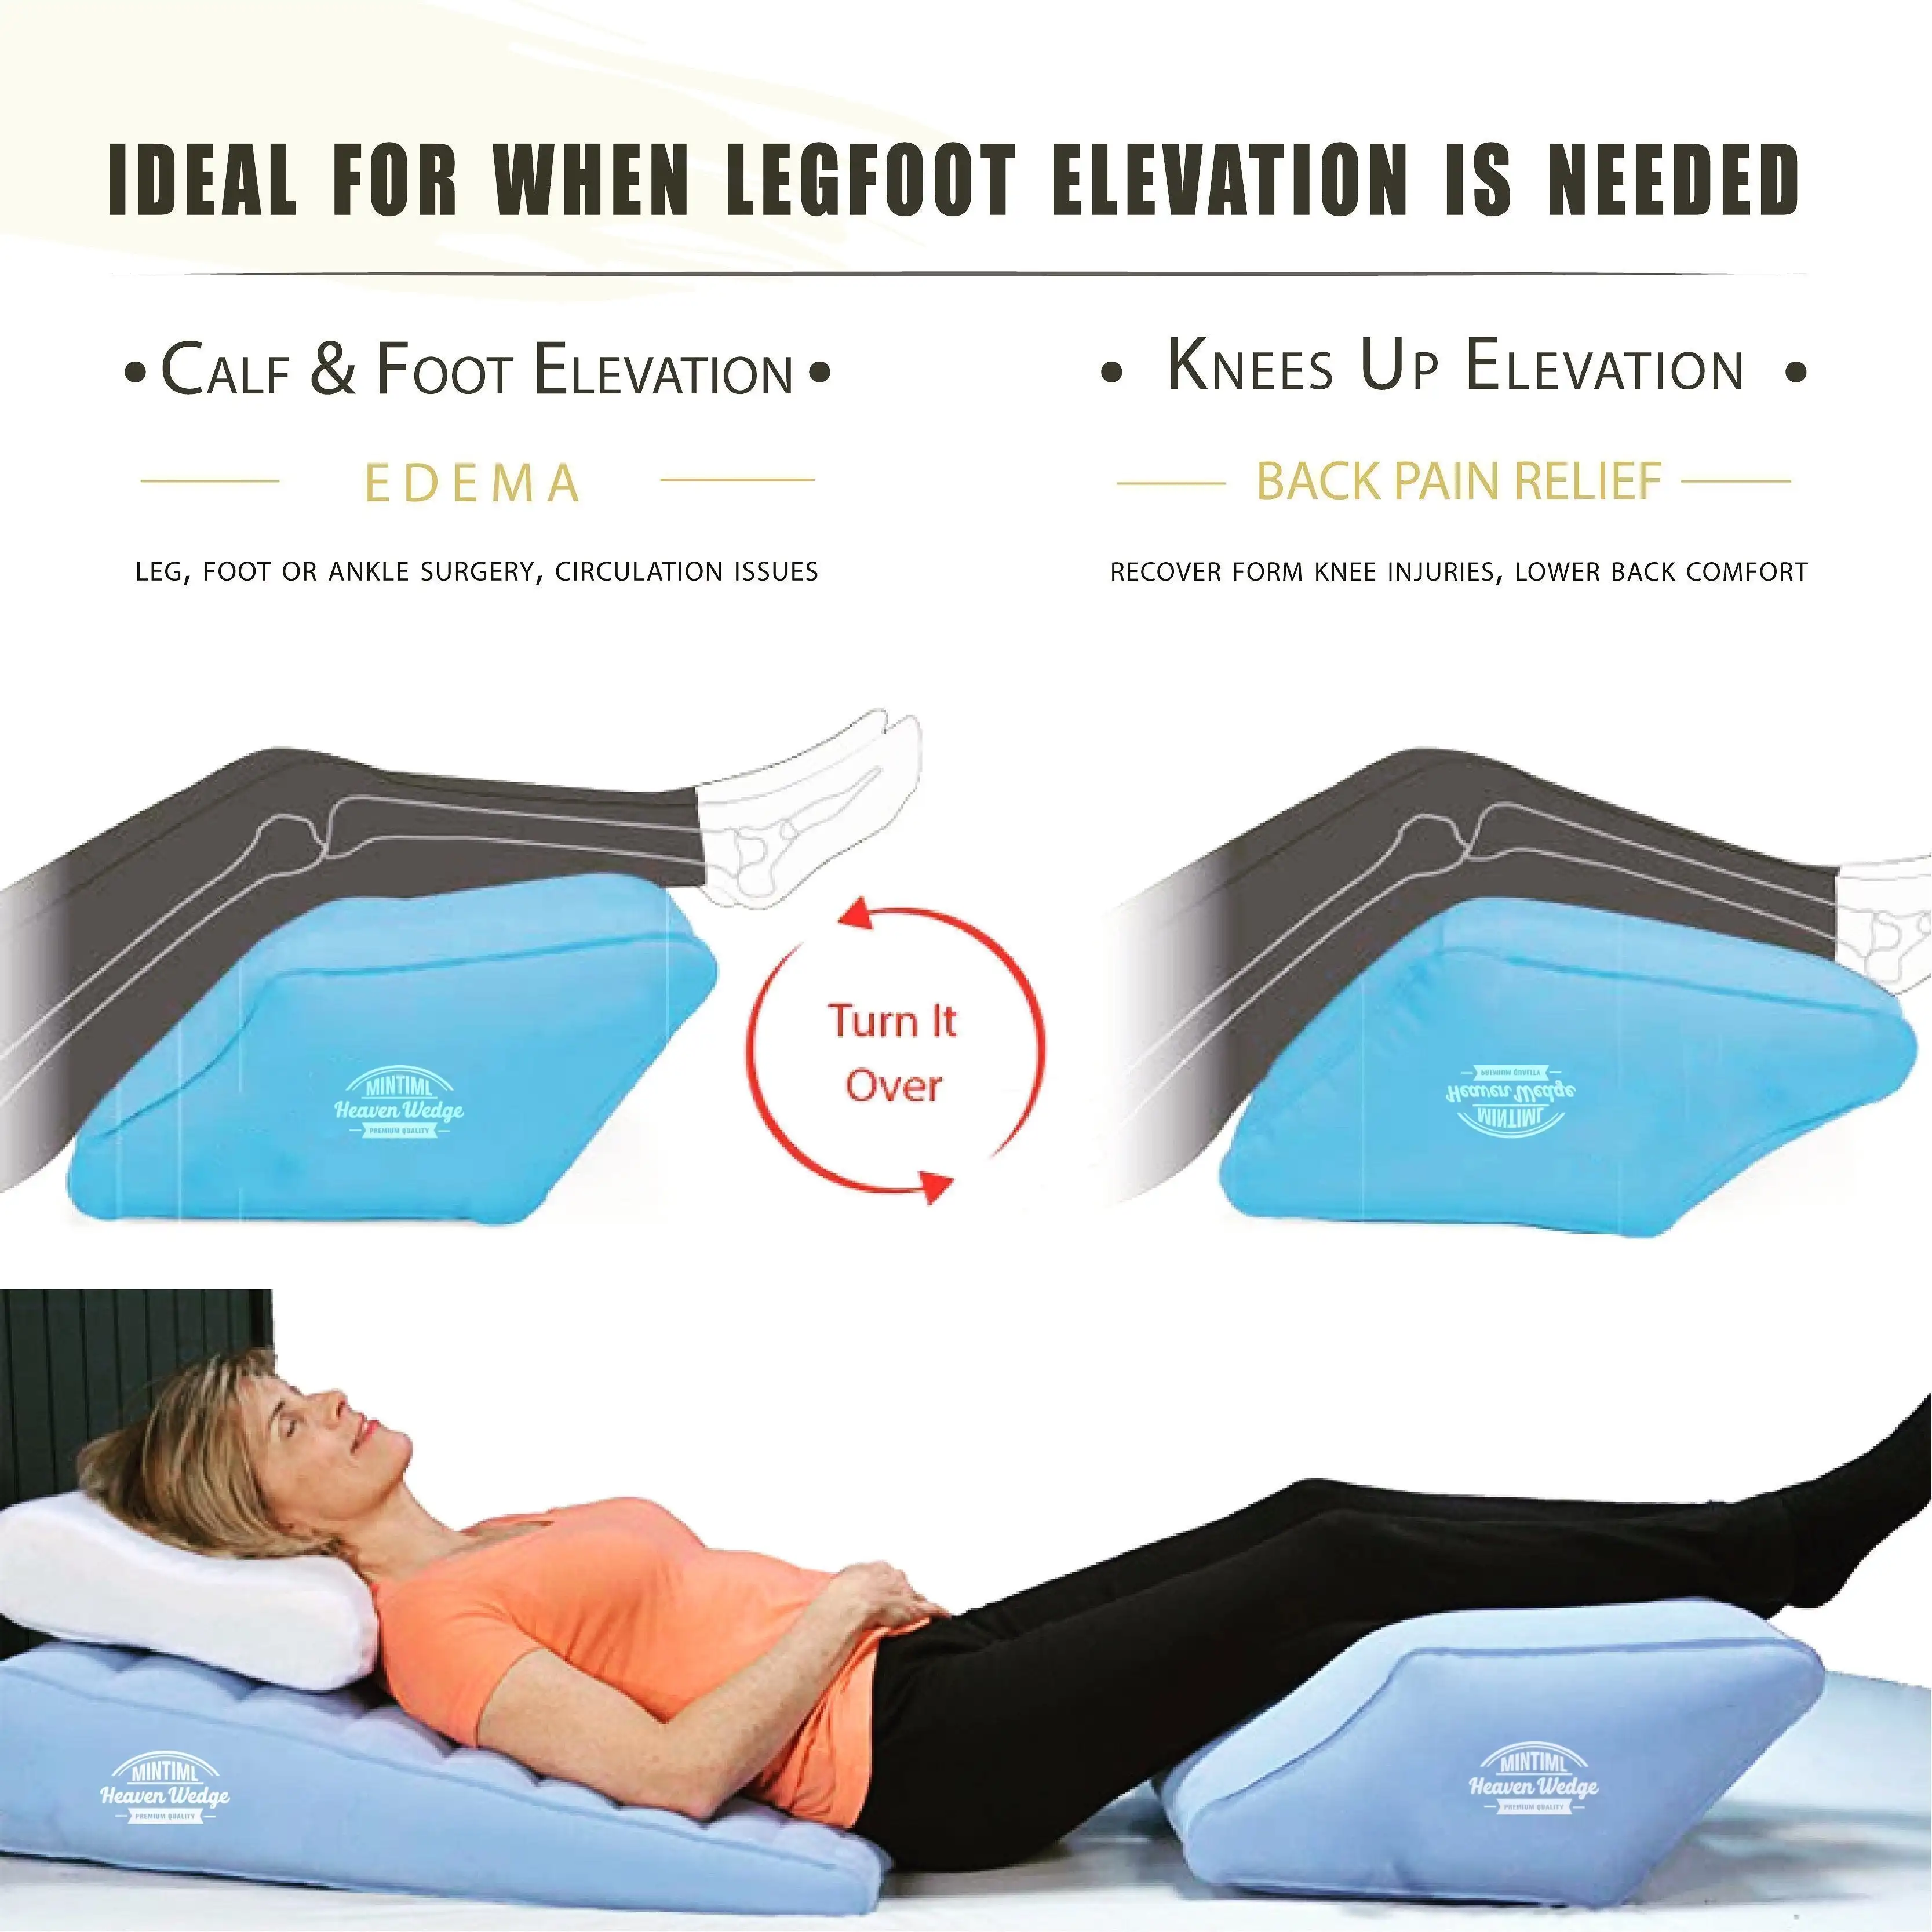 https://ae01.alicdn.com/kf/S541db23aab1849b2872e3a5569b5c256K/1pcs-Portable-Inflatable-Elevation-Wedge-Leg-Foot-Pillow-For-Sleeping-Knee-Support-Cushion-Between-The-Legs.jpg